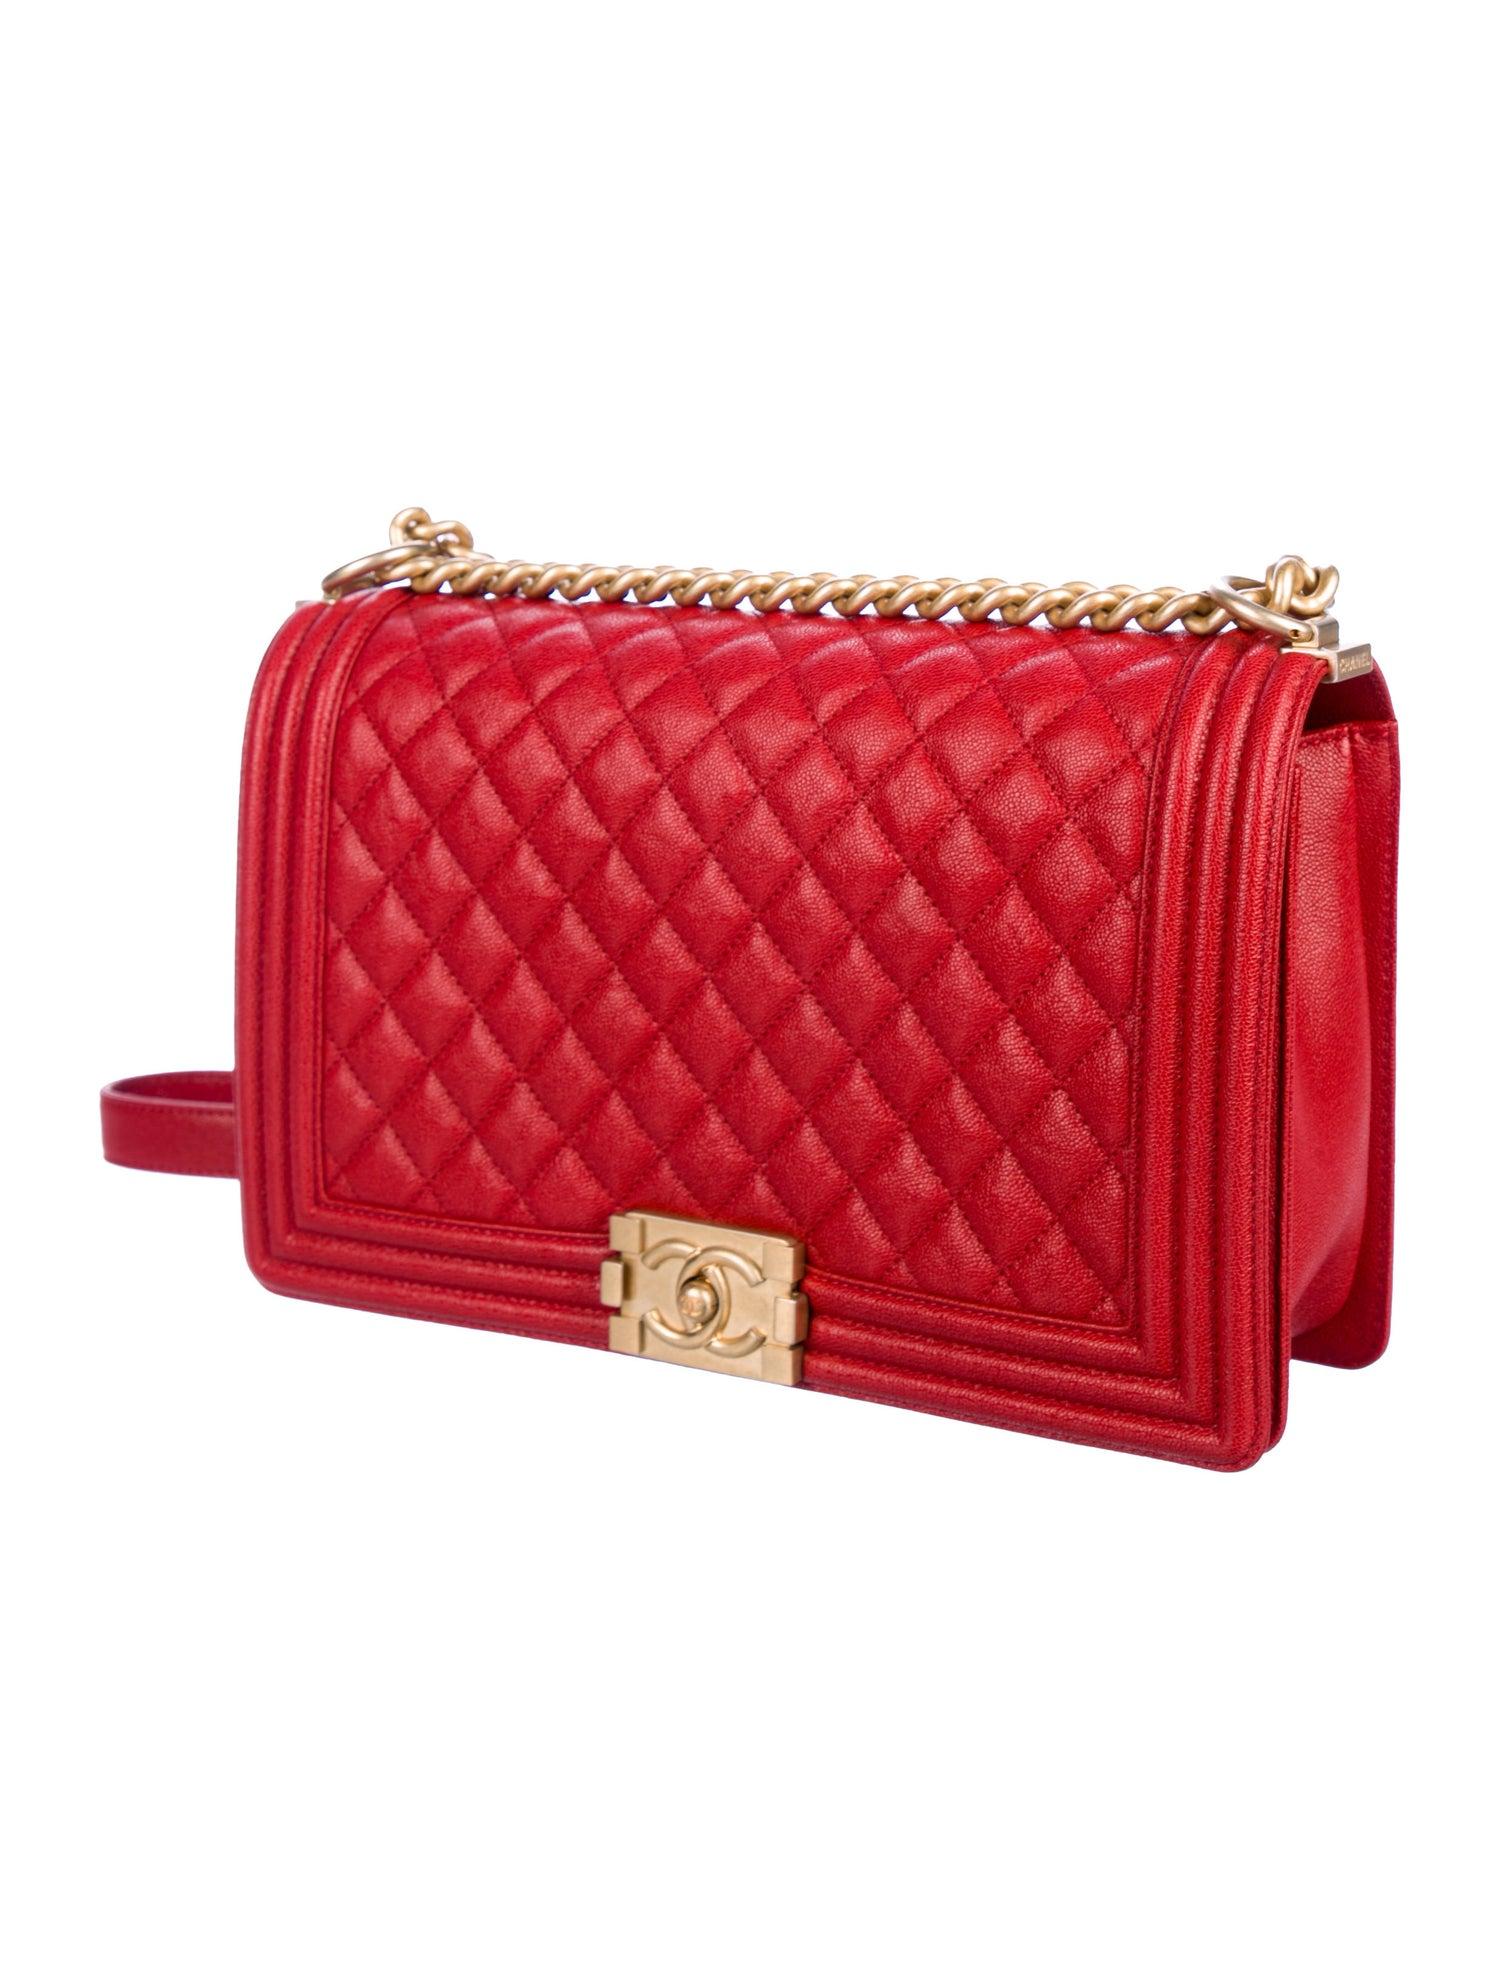 Chanel Red Leather Gold Jumbo Large Boy Evening Shoulder Bag in Box

Leather
Gold-tone hardware
Grosgrain lining
Push-lock closure
Date code present
Made in France
Shoulder strap drop 20